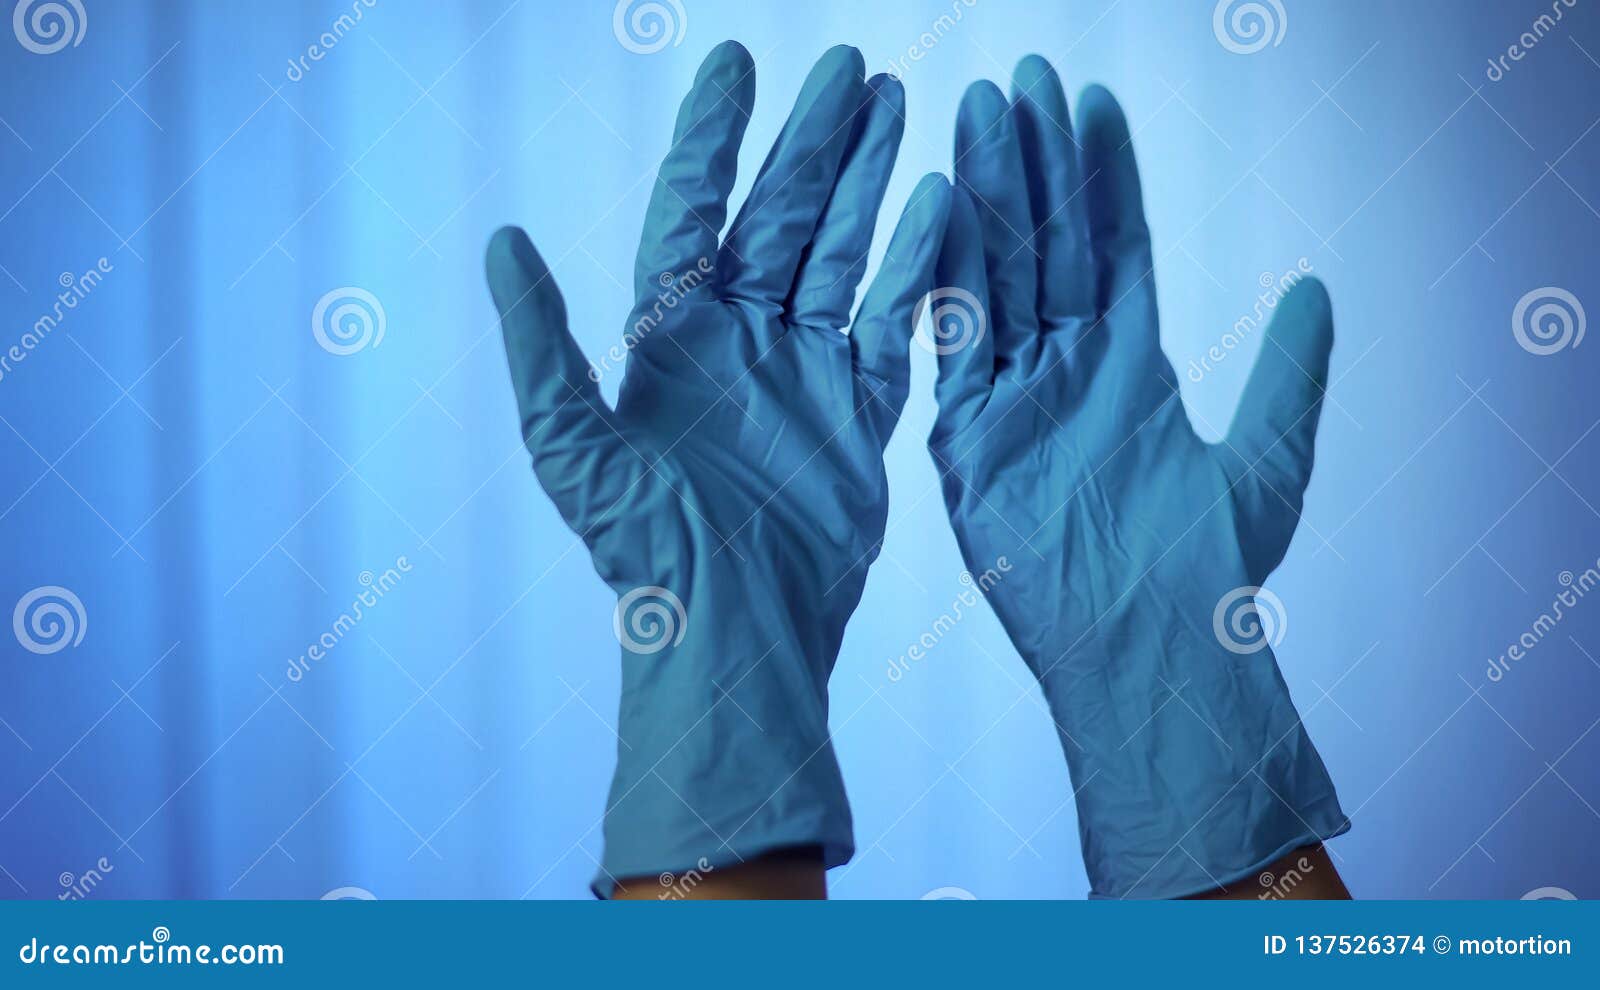 close-up hands in latex rubber gloves, medical sterility, skin protection